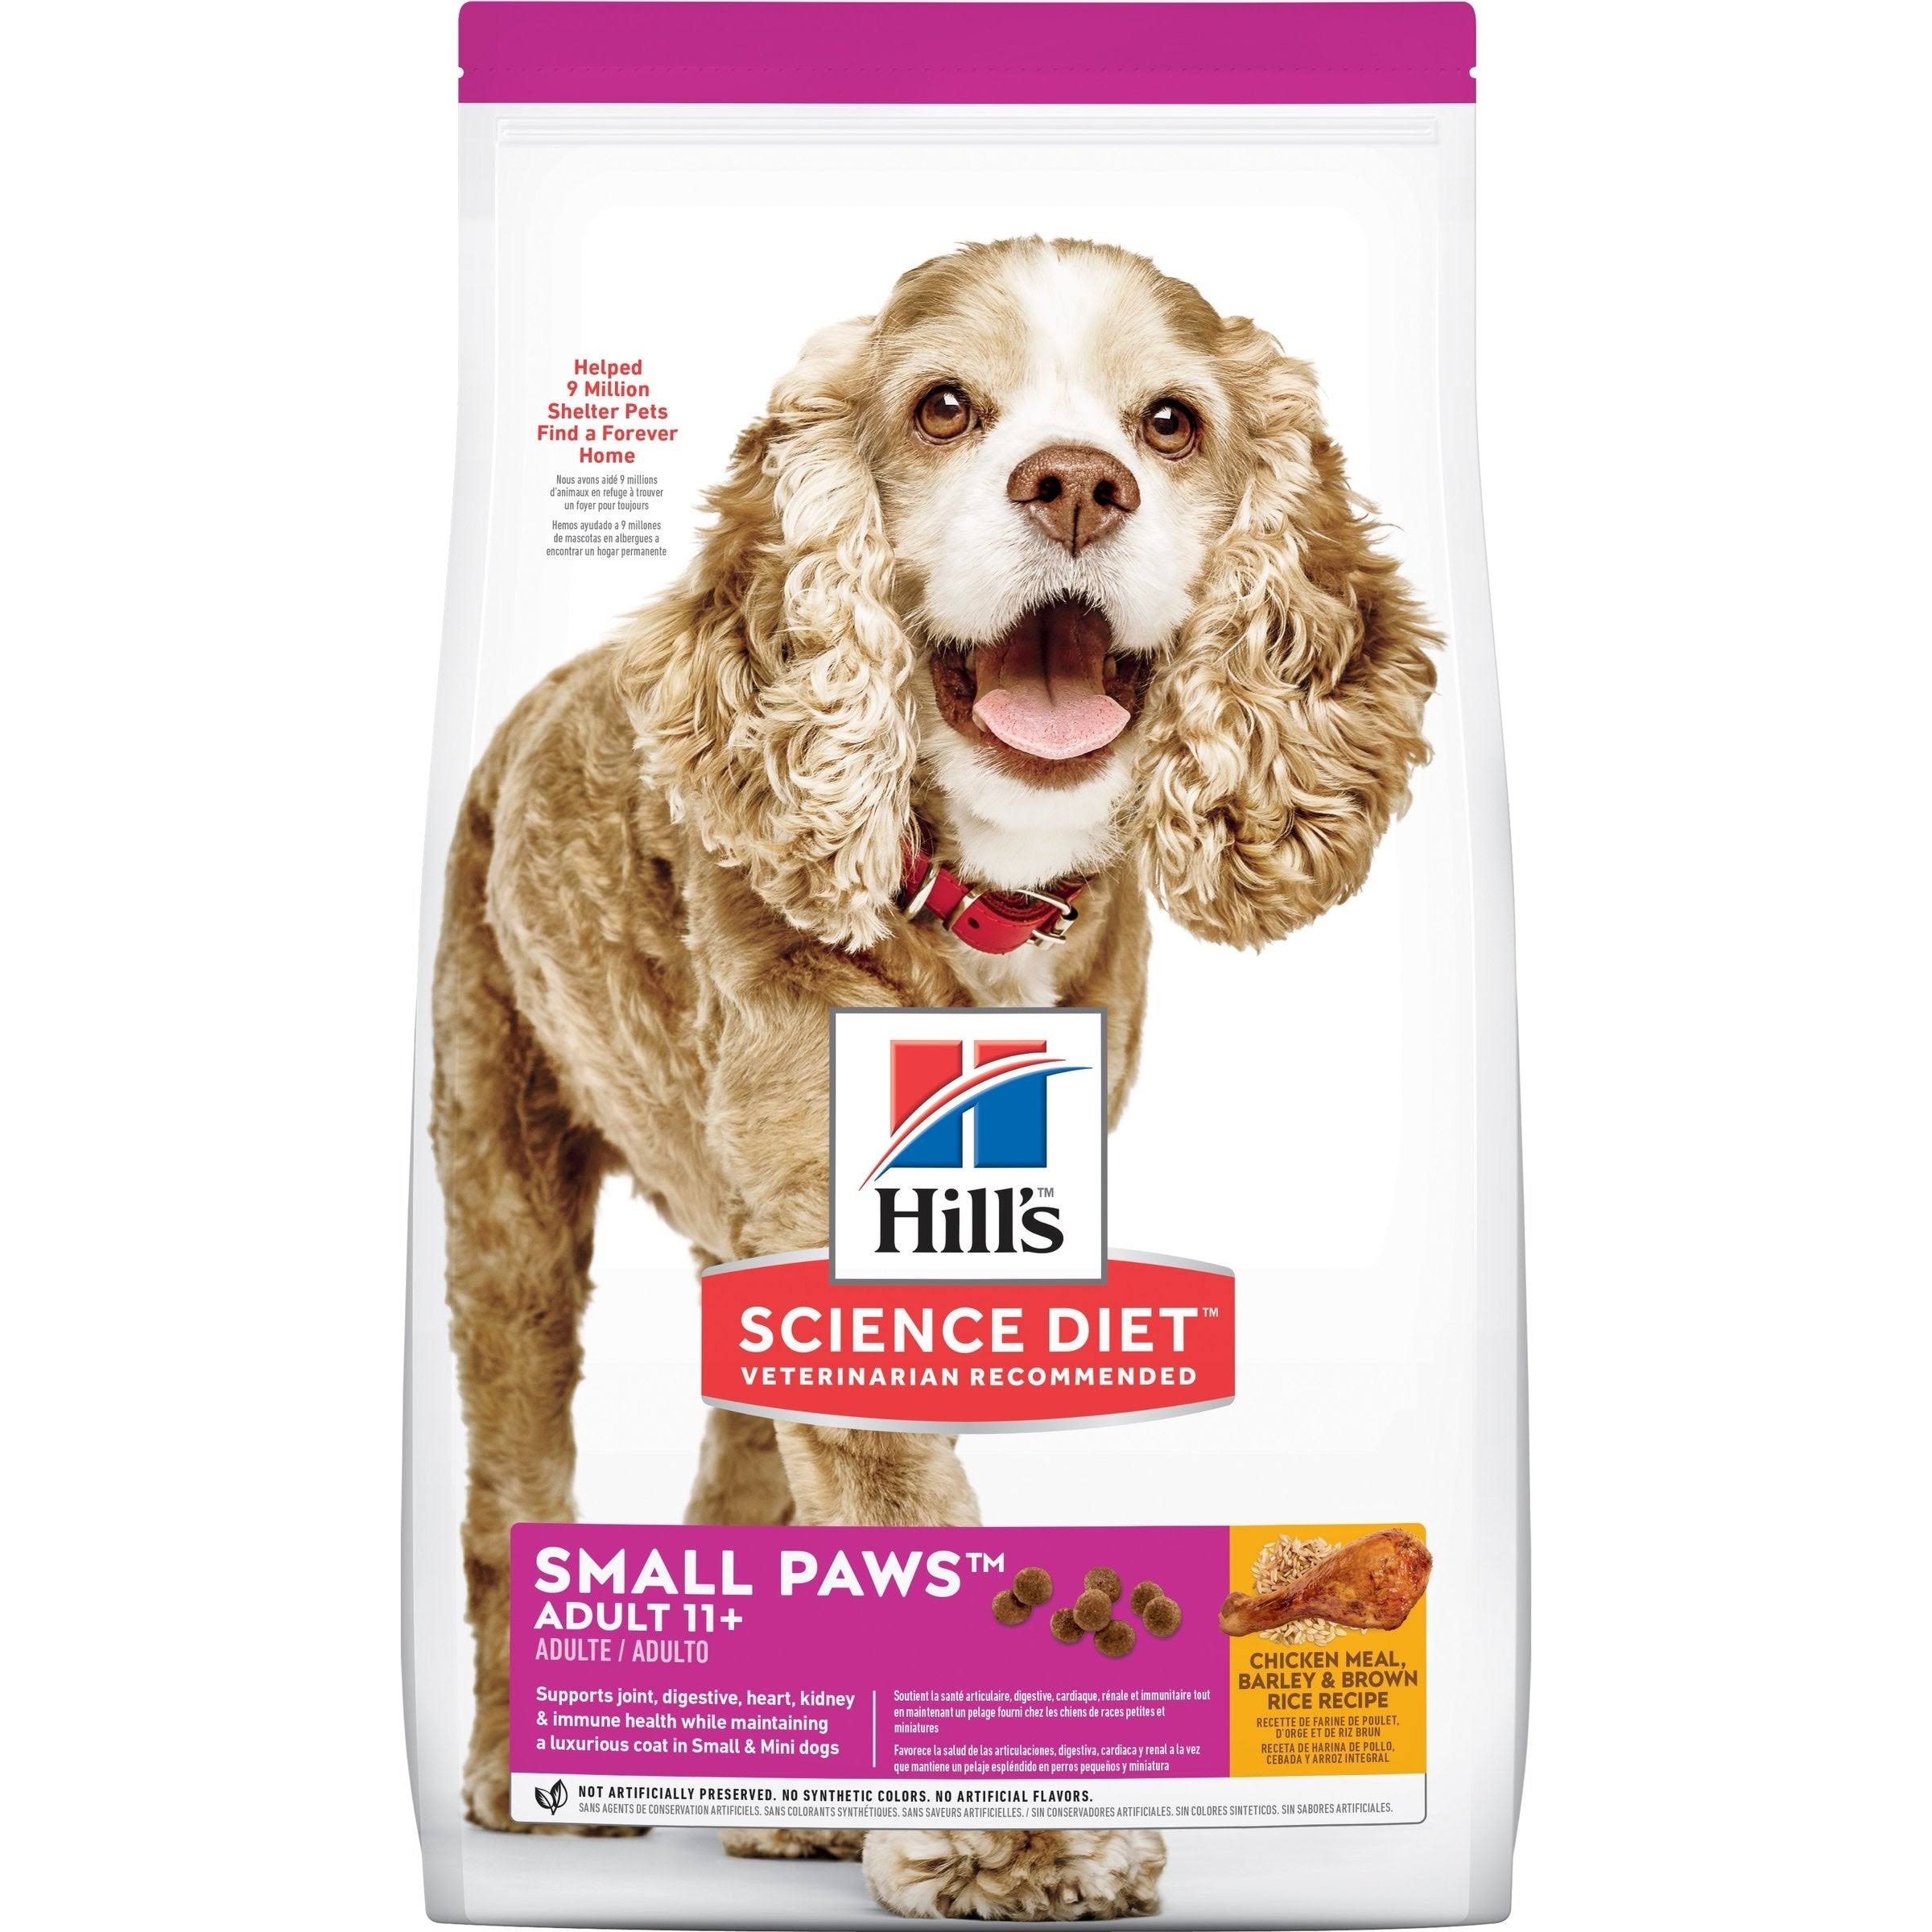 Hill's Science Diet Chicken Meal Premium Natural Dog Food - Rice and Barley Recipe, 4.5lbs